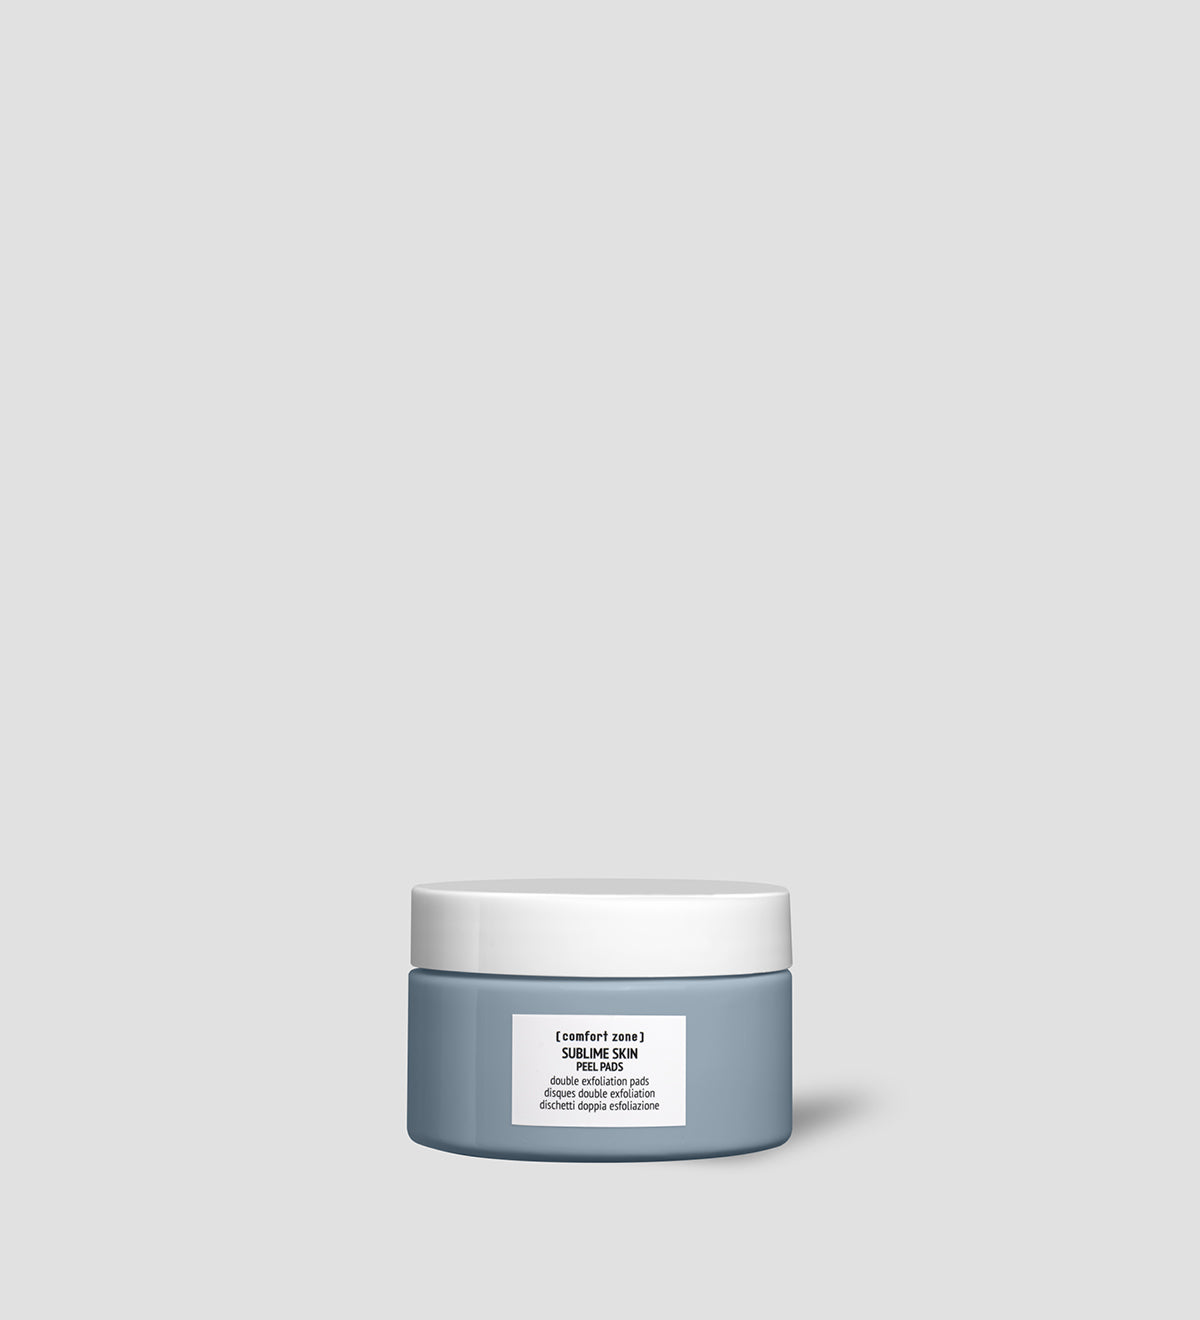 Comfort Zone: SUBLIME SKIN PEEL PADS Double exfoliation pads-